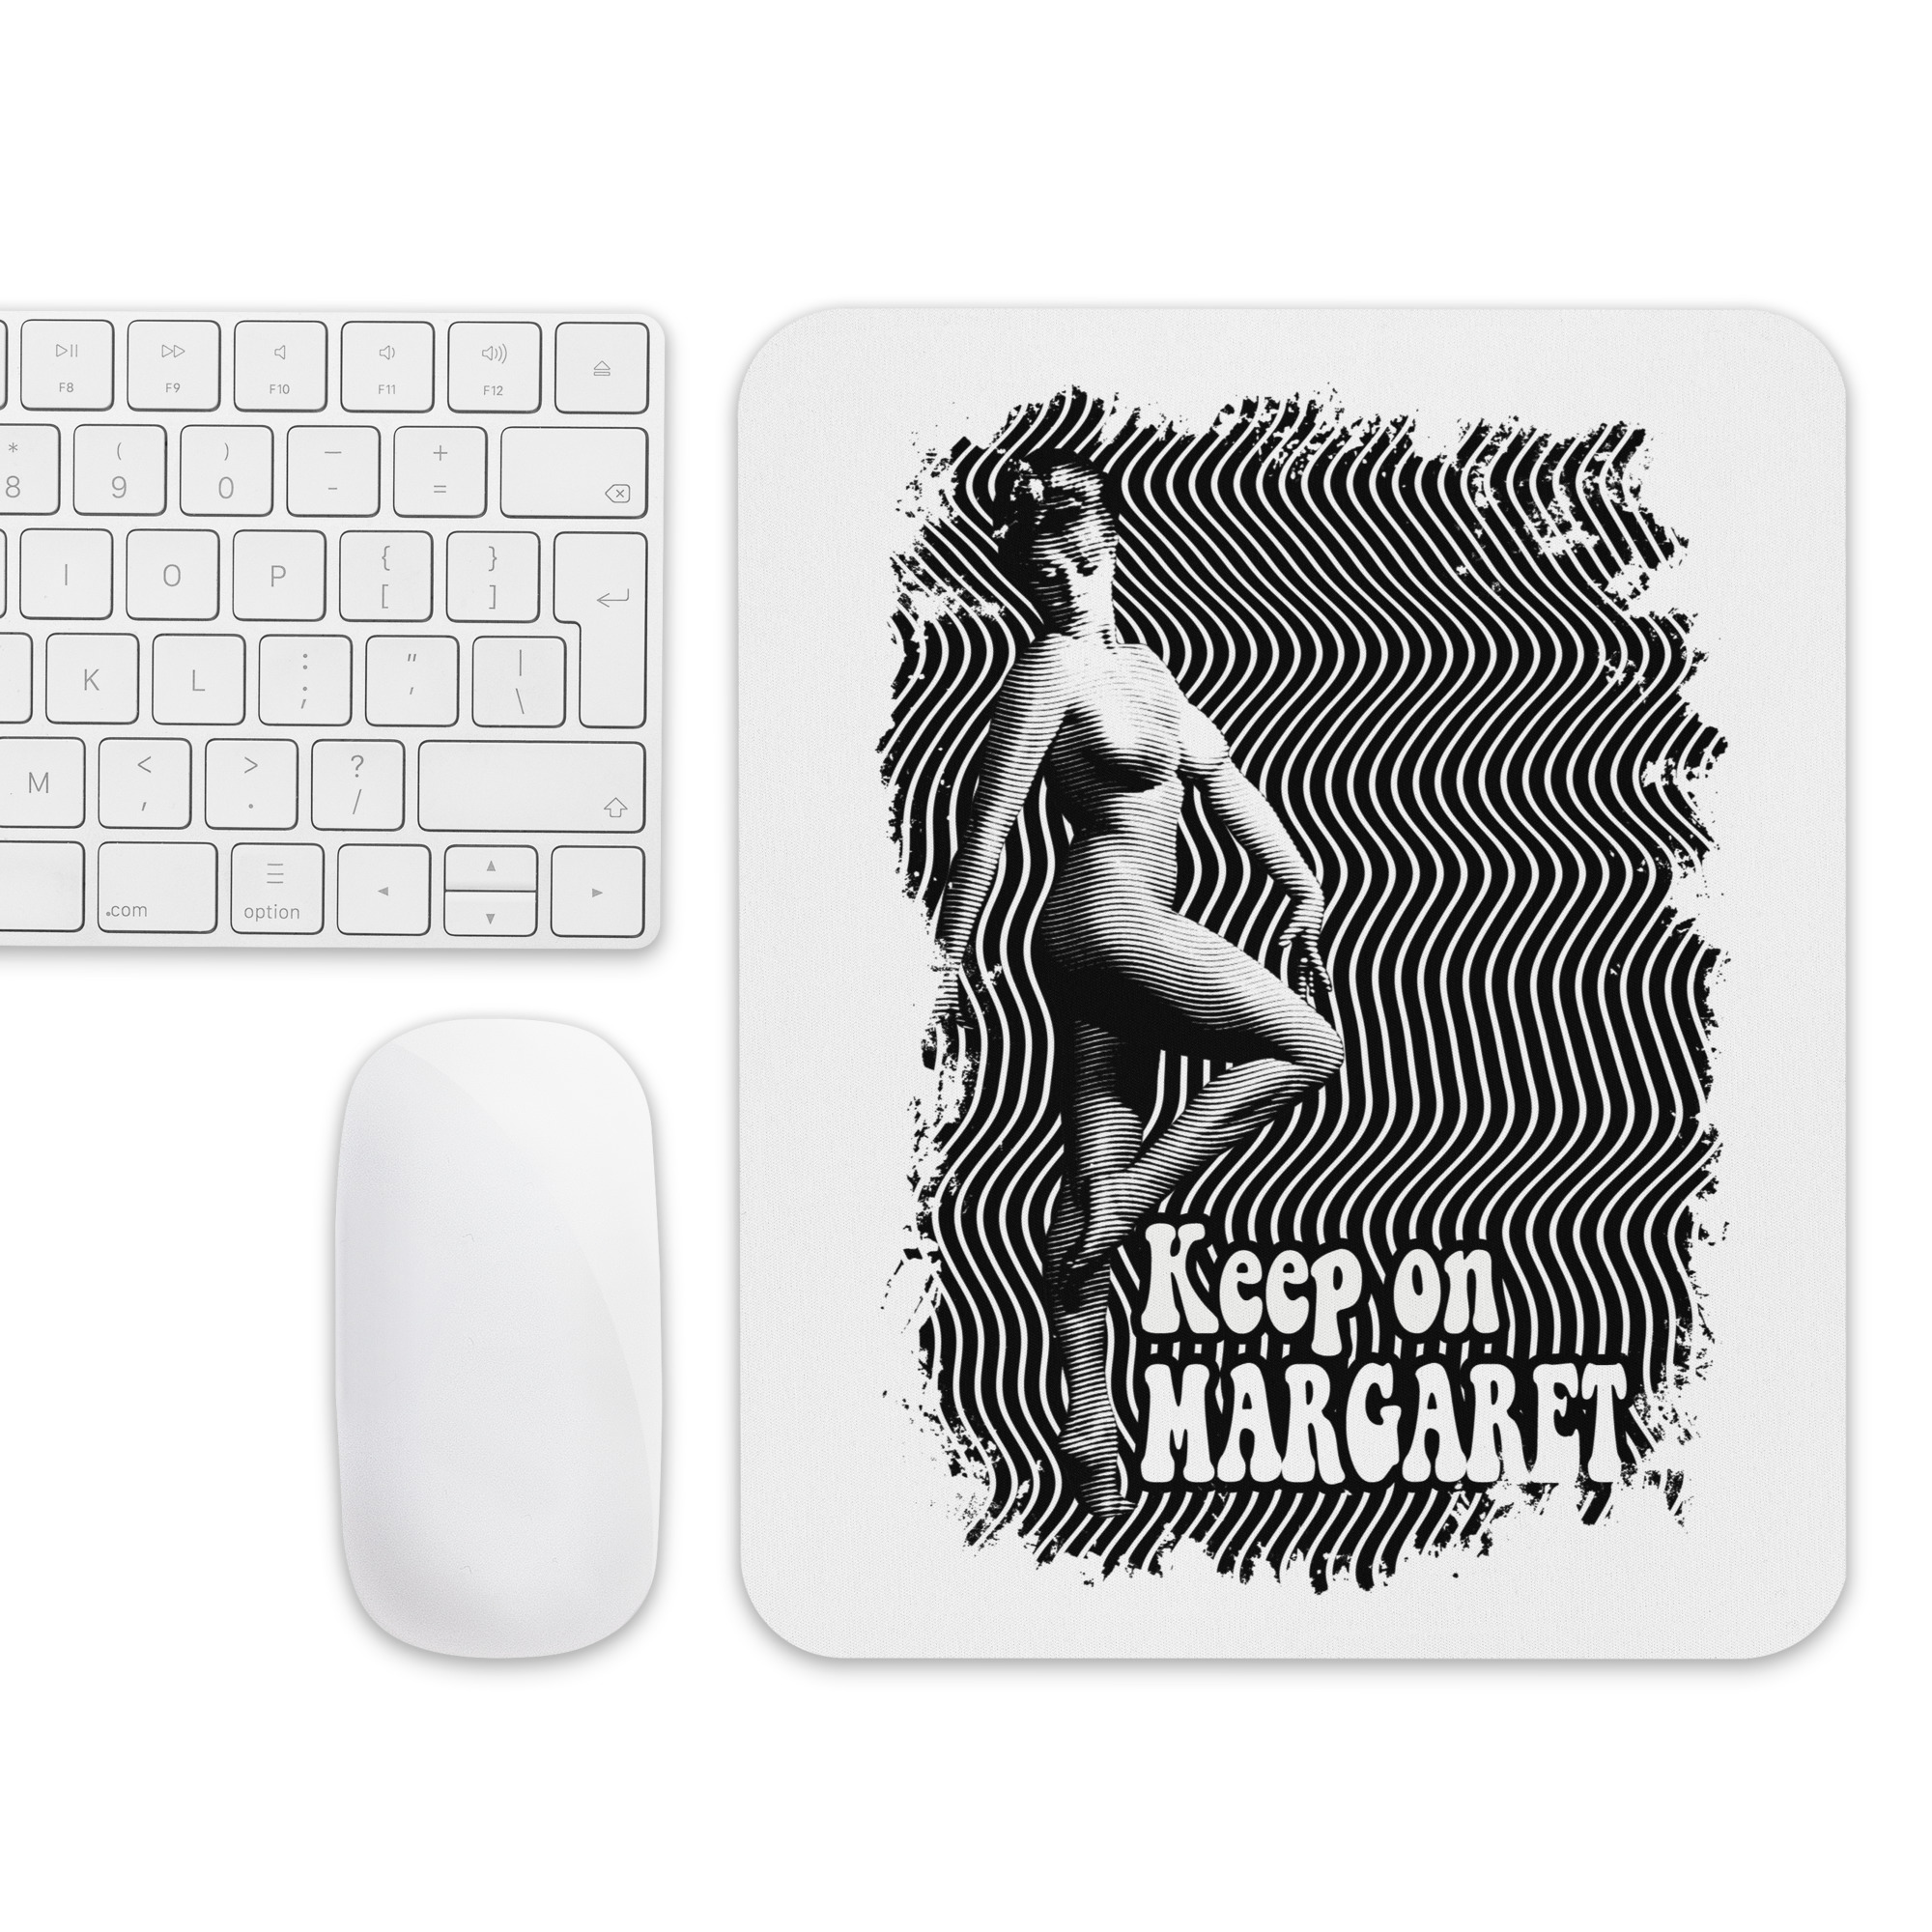 mouse-pad-white-front-64cd19ced39b1.jpg